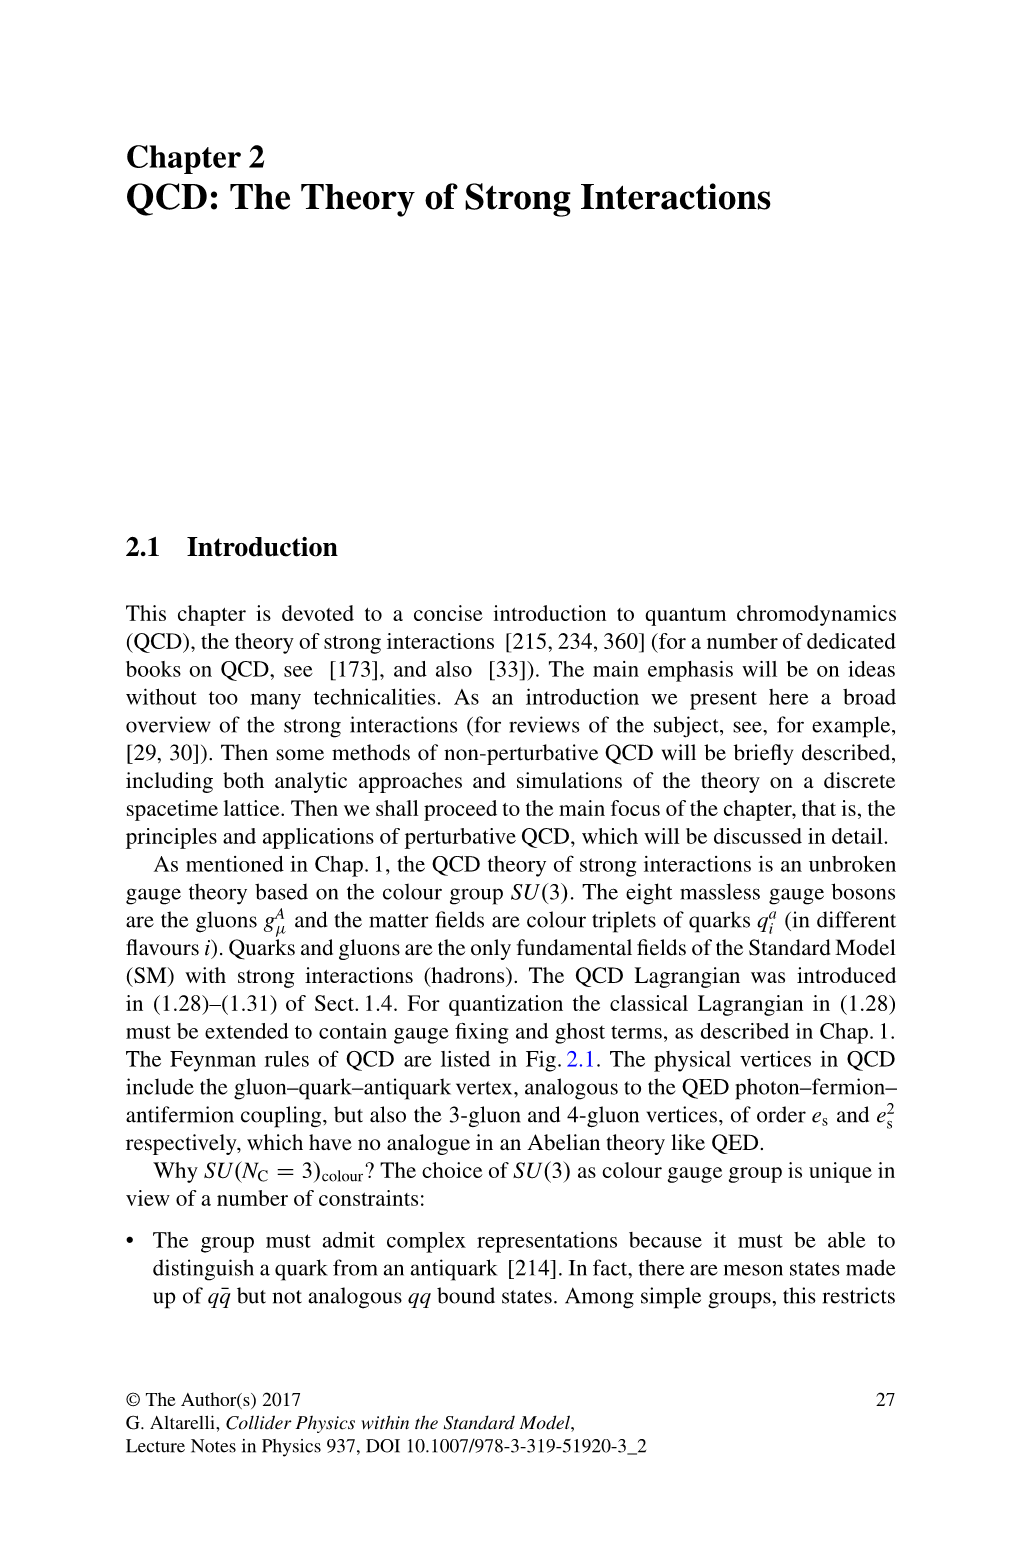 Chapter 2 QCD: the Theory of Strong Interactions